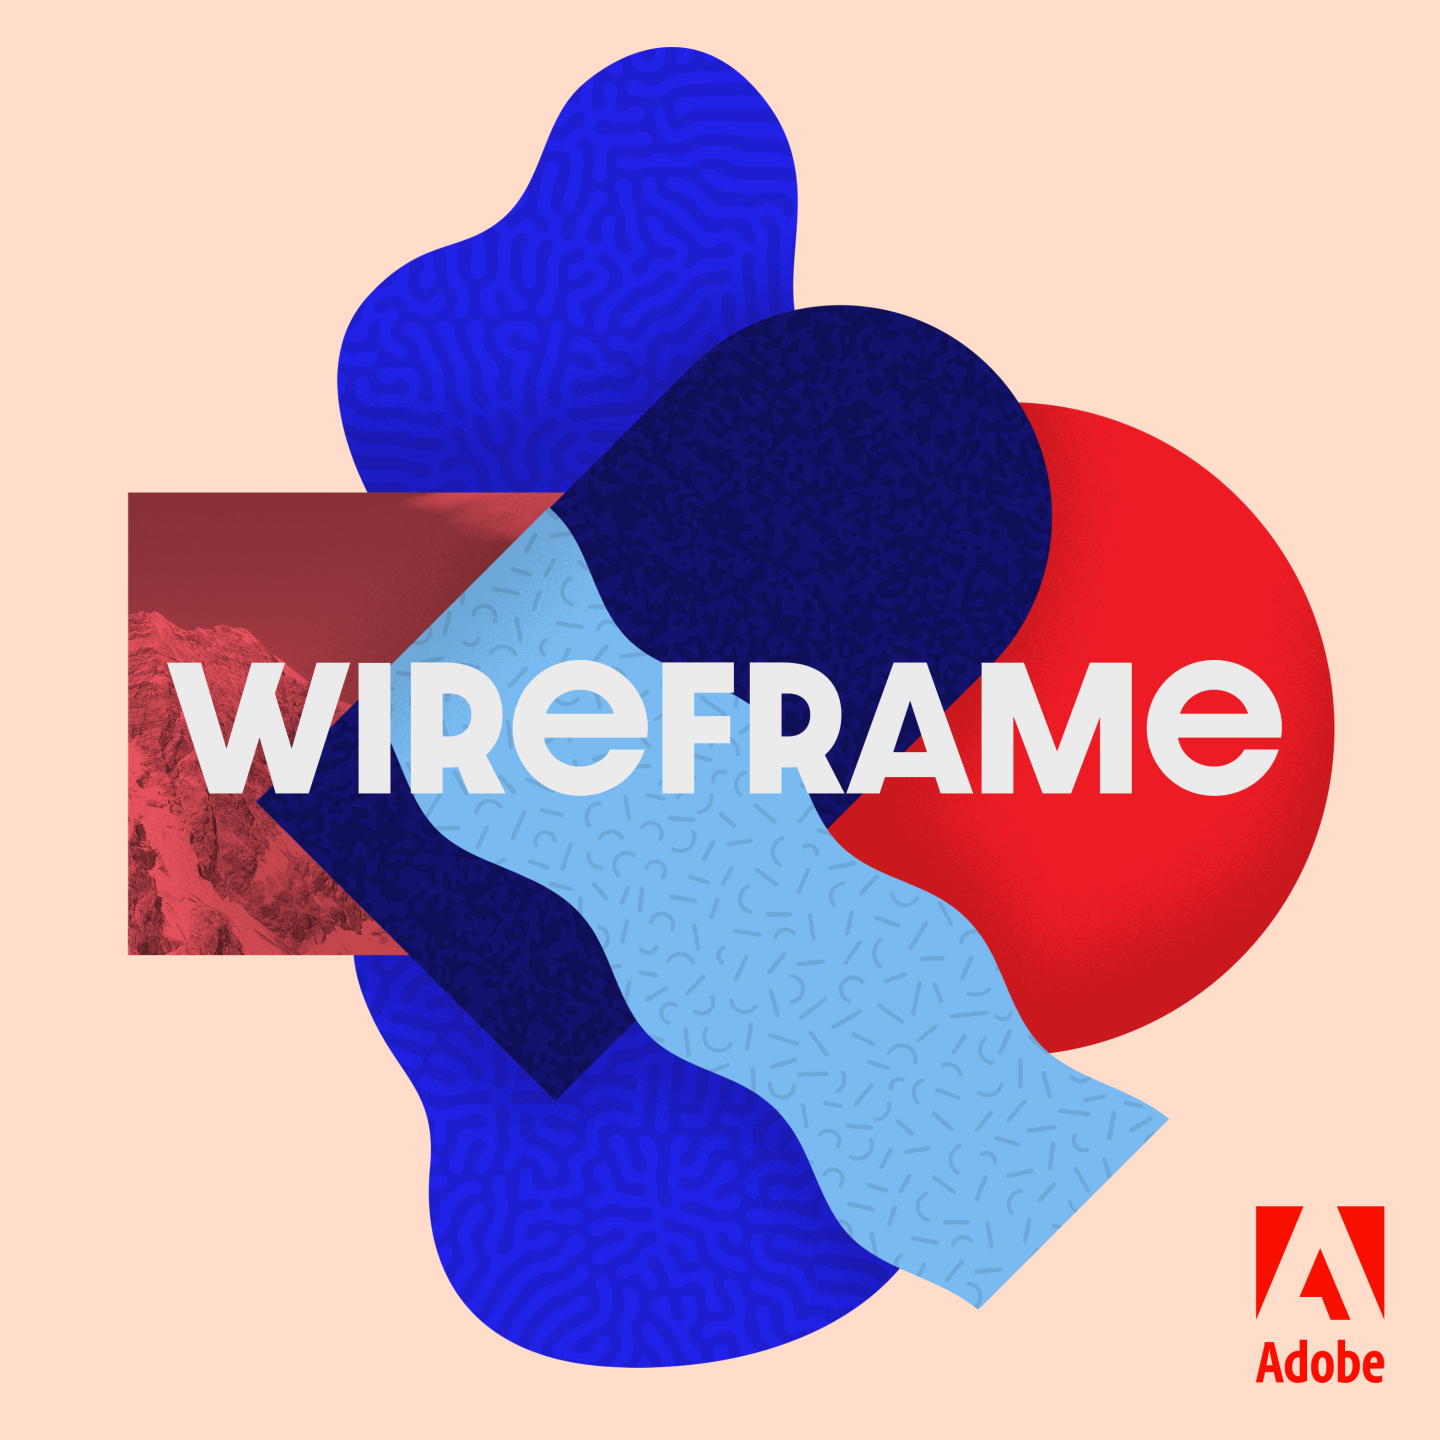 The Wireframe podcast is hosted by Khoi Vinh.